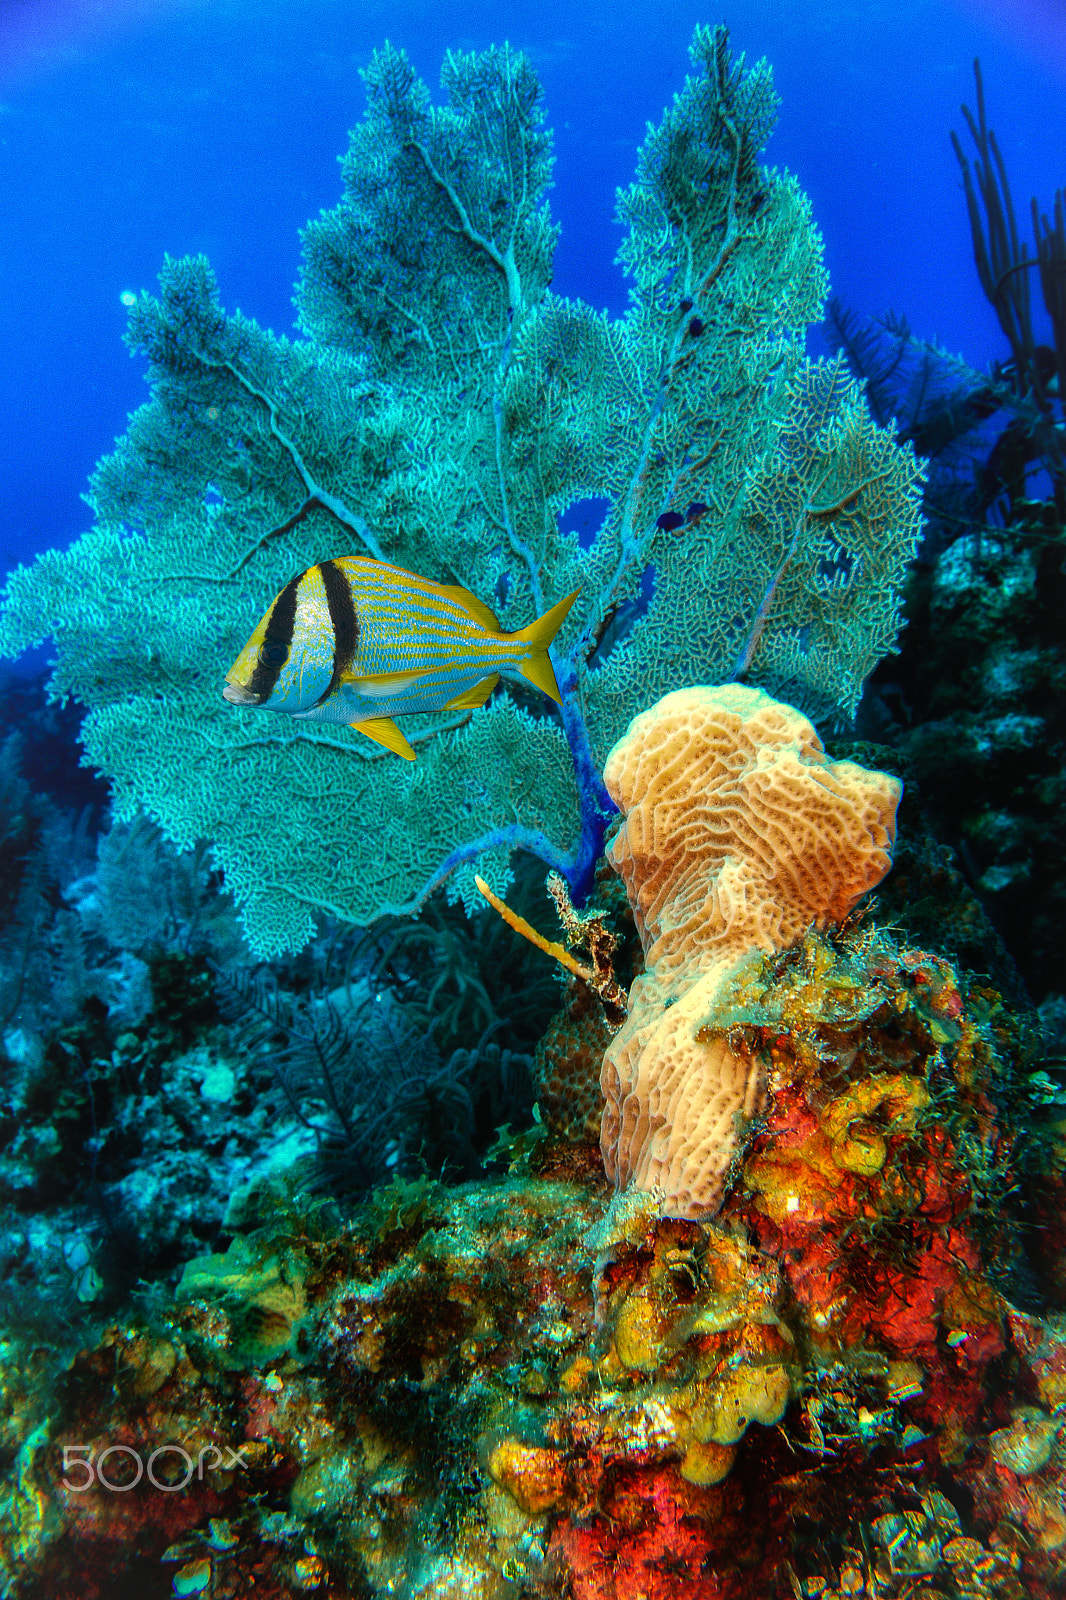 Nikon 1 AW1 sample photo. Under the sea in belize photography